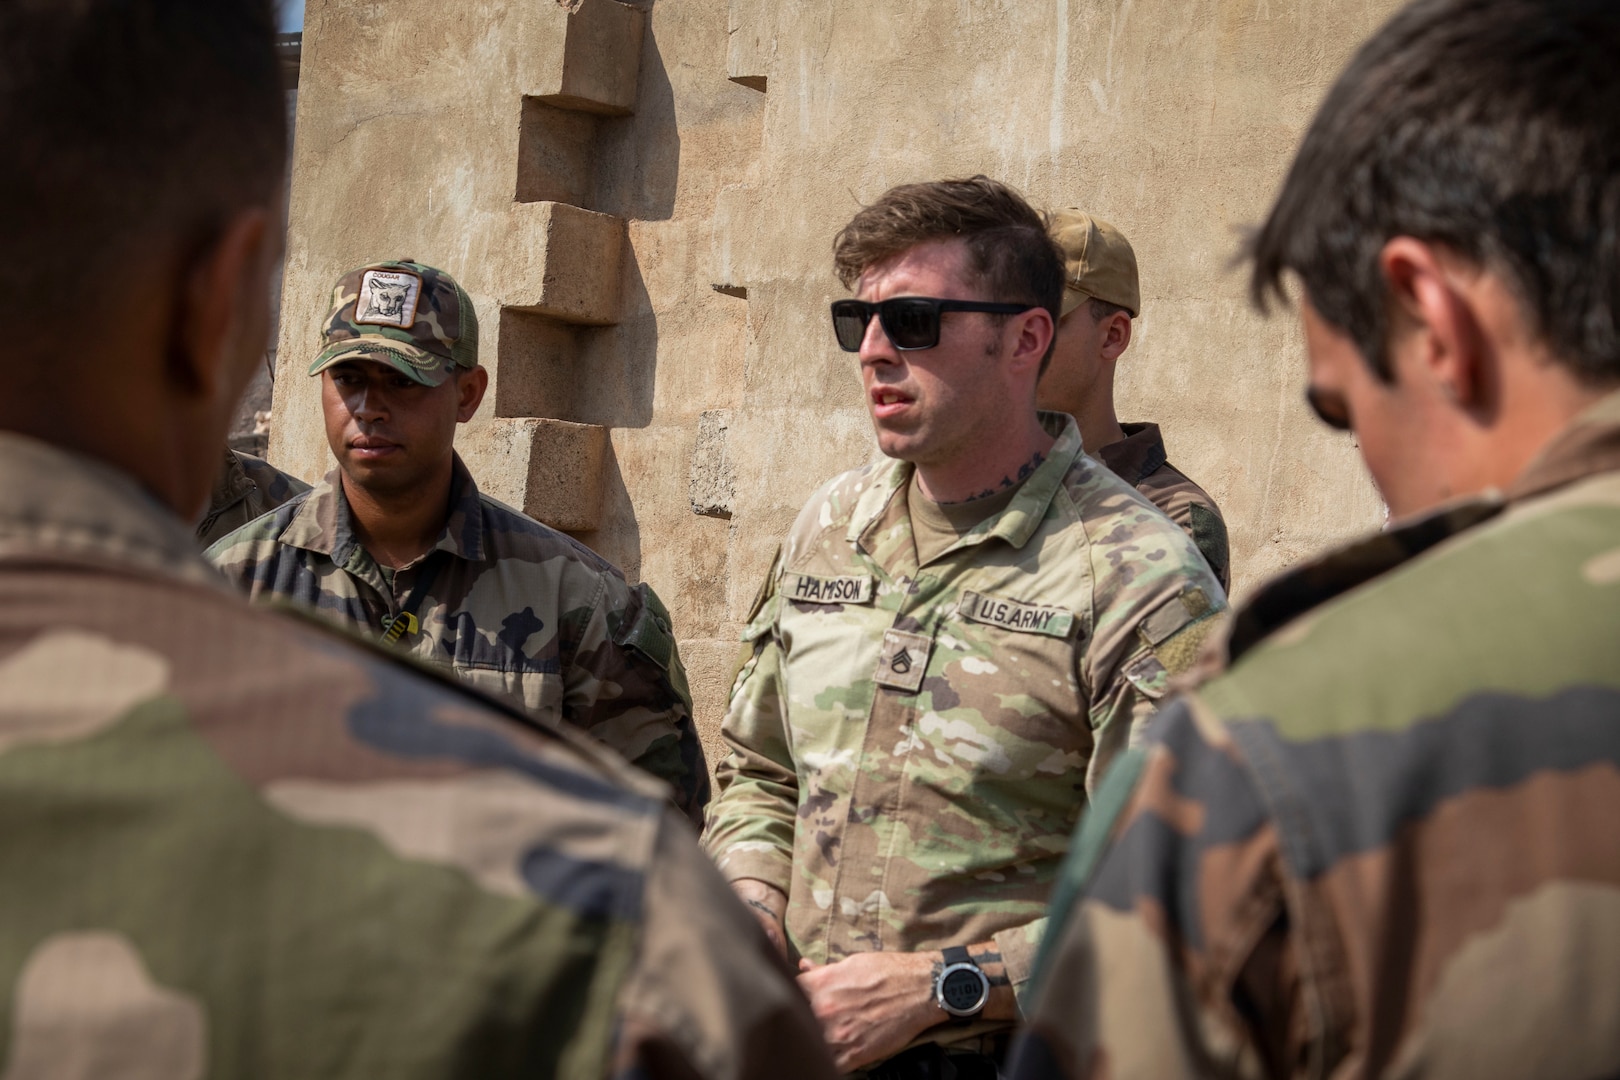 U.S. Army Staff Sgt. John Hampson, an instructor at the U.S. Army Mountain Warfare School, discusses mountain casualty evacuation with French service members with the 5th Overseas Interarms Regiment (5e RIAOM) at the French Combat Training Center at Arta Beach, Djibouti, Dec. 14, 2021. Instructors from the U.S. Army Mountain Warfare School in Jericho, Vt., taught a five-day Joint Expeditionary Mountain Warfare Course on basic military mountaineering skills to French service members in Djibouti to strengthen relationships with international forces working together in the region.